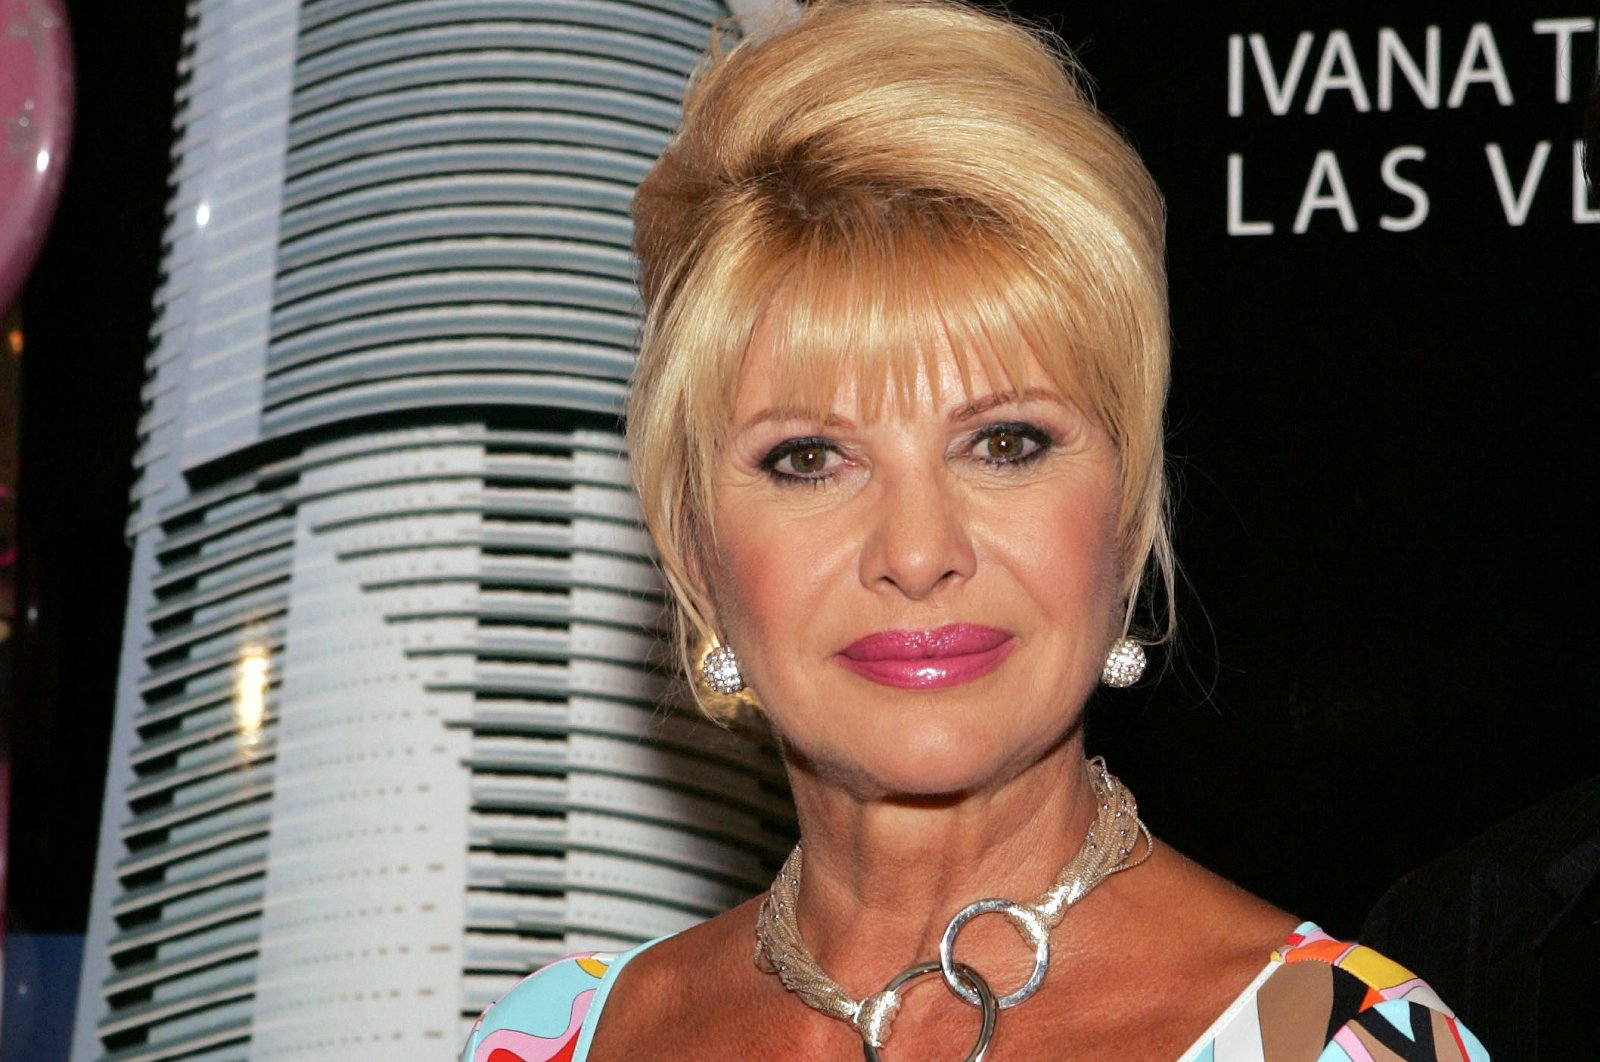 U.S. socialite Ivana Trump arrives for the Los Angeles launch of Ivana Trump Las Vegas, a luxury residential building, at the Regent Beverly Wilshire Hotel in Beverly Hills, U.S., Aug. 15, 2005. (Reuters Photo)